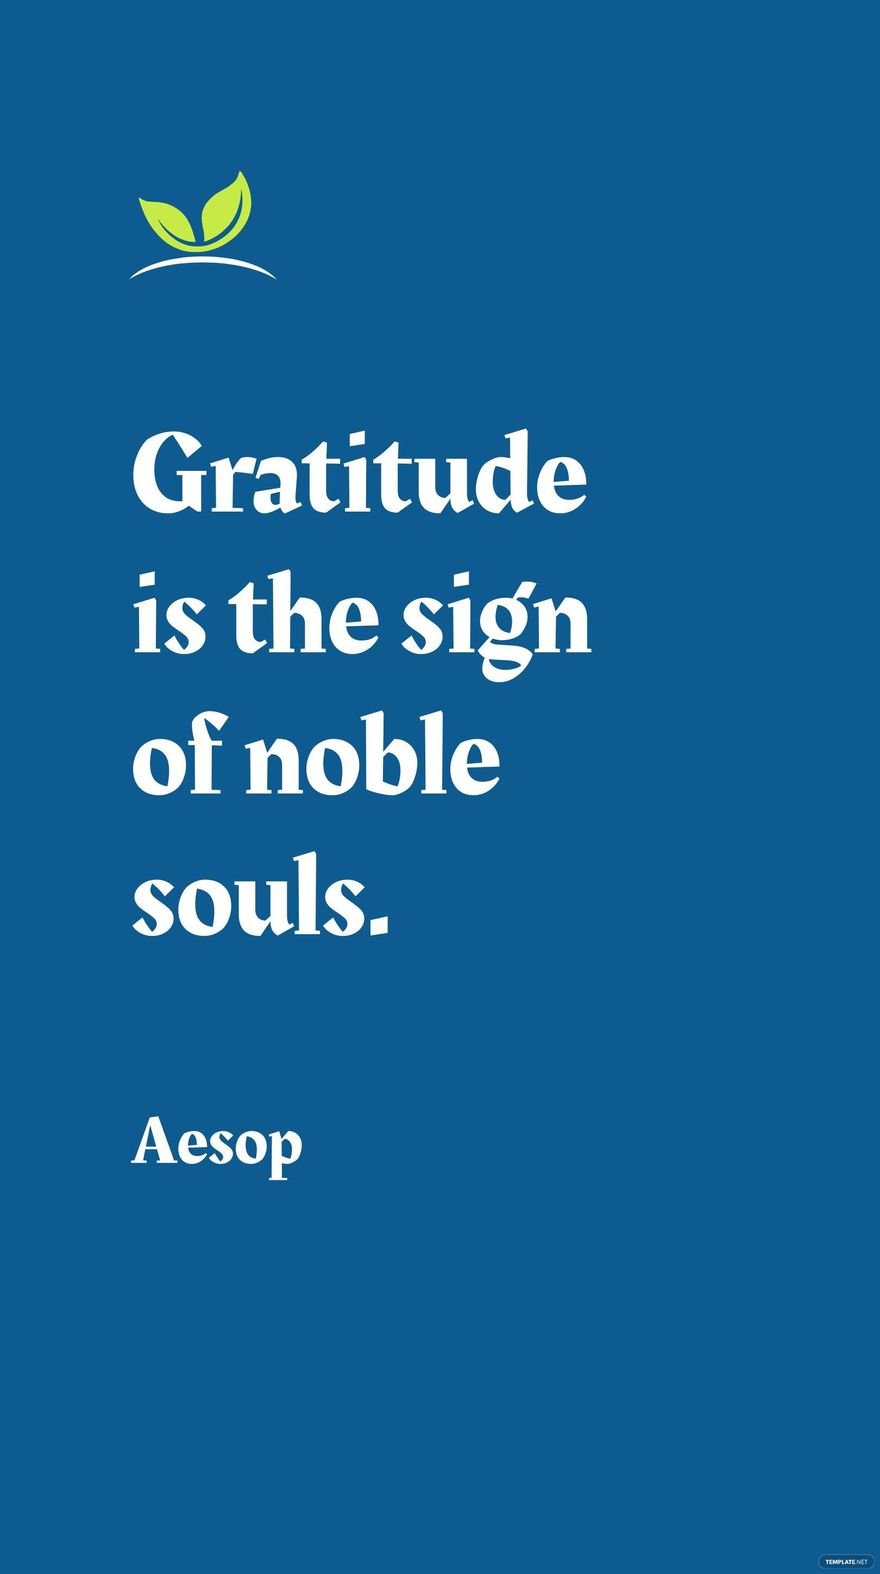 Aesop - Gratitude is the sign of noble souls.